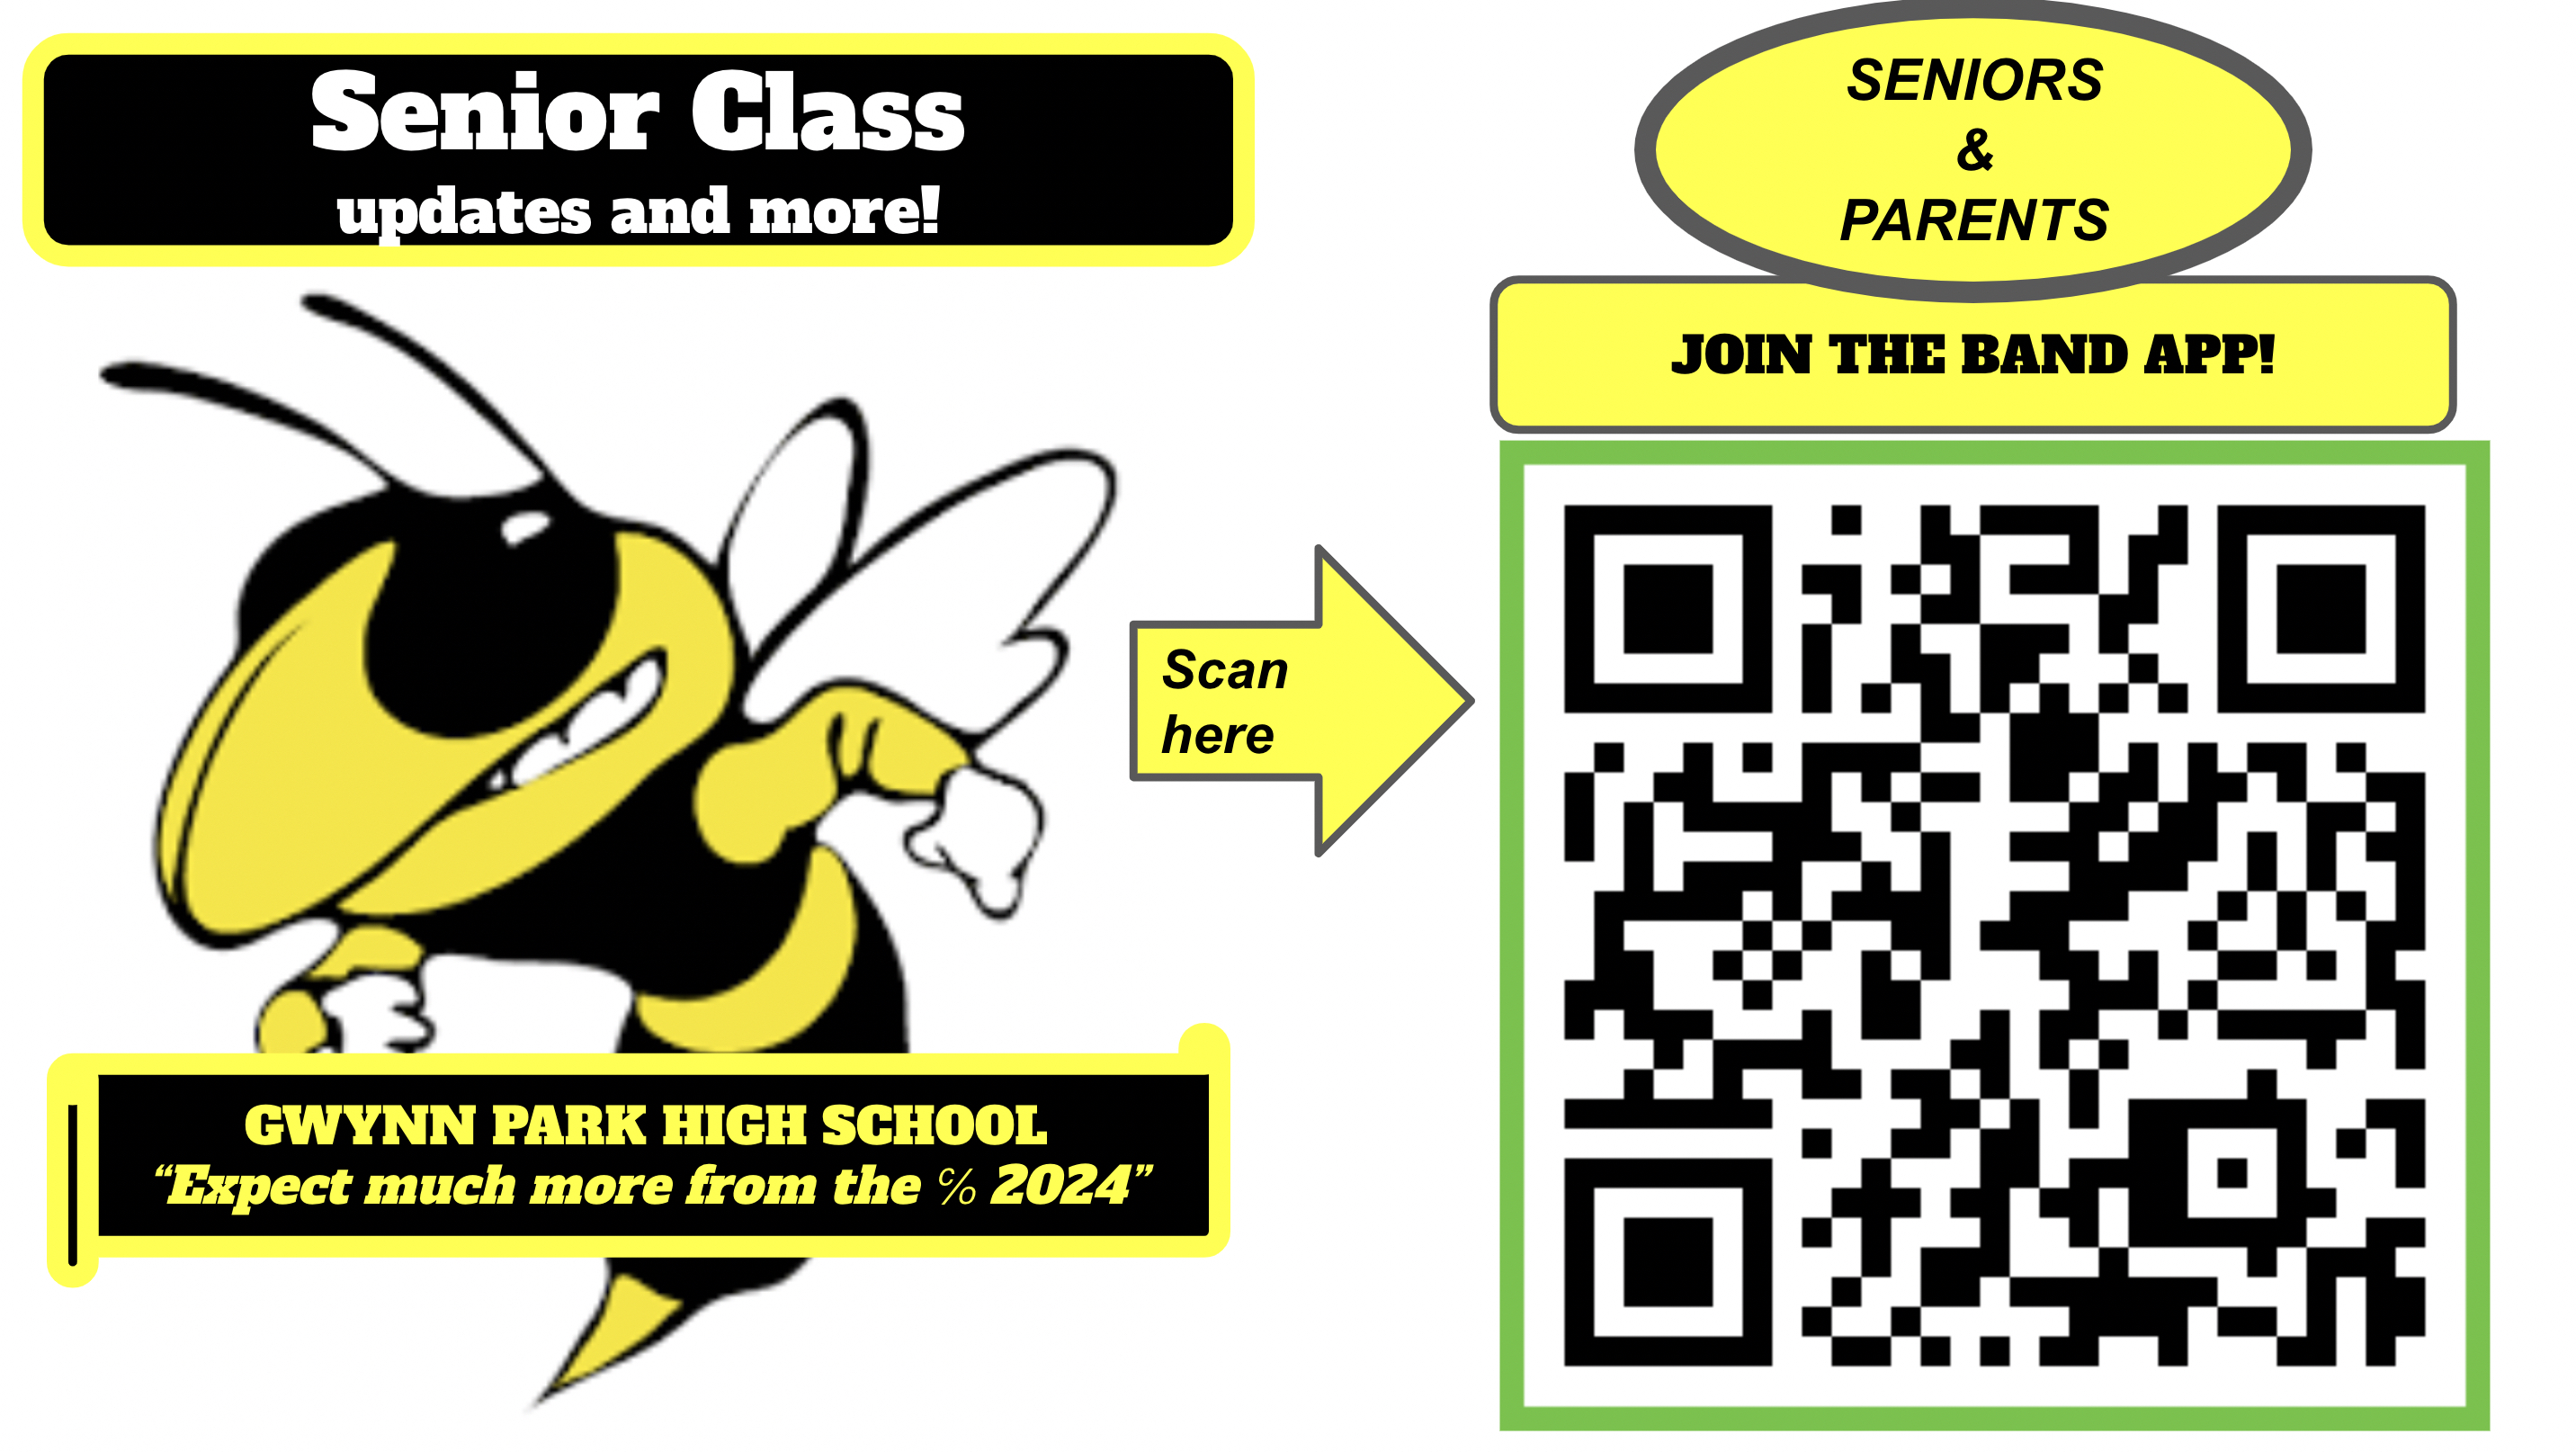 Students-and-Parents-Join-the-Band-App-flyer.jpeg